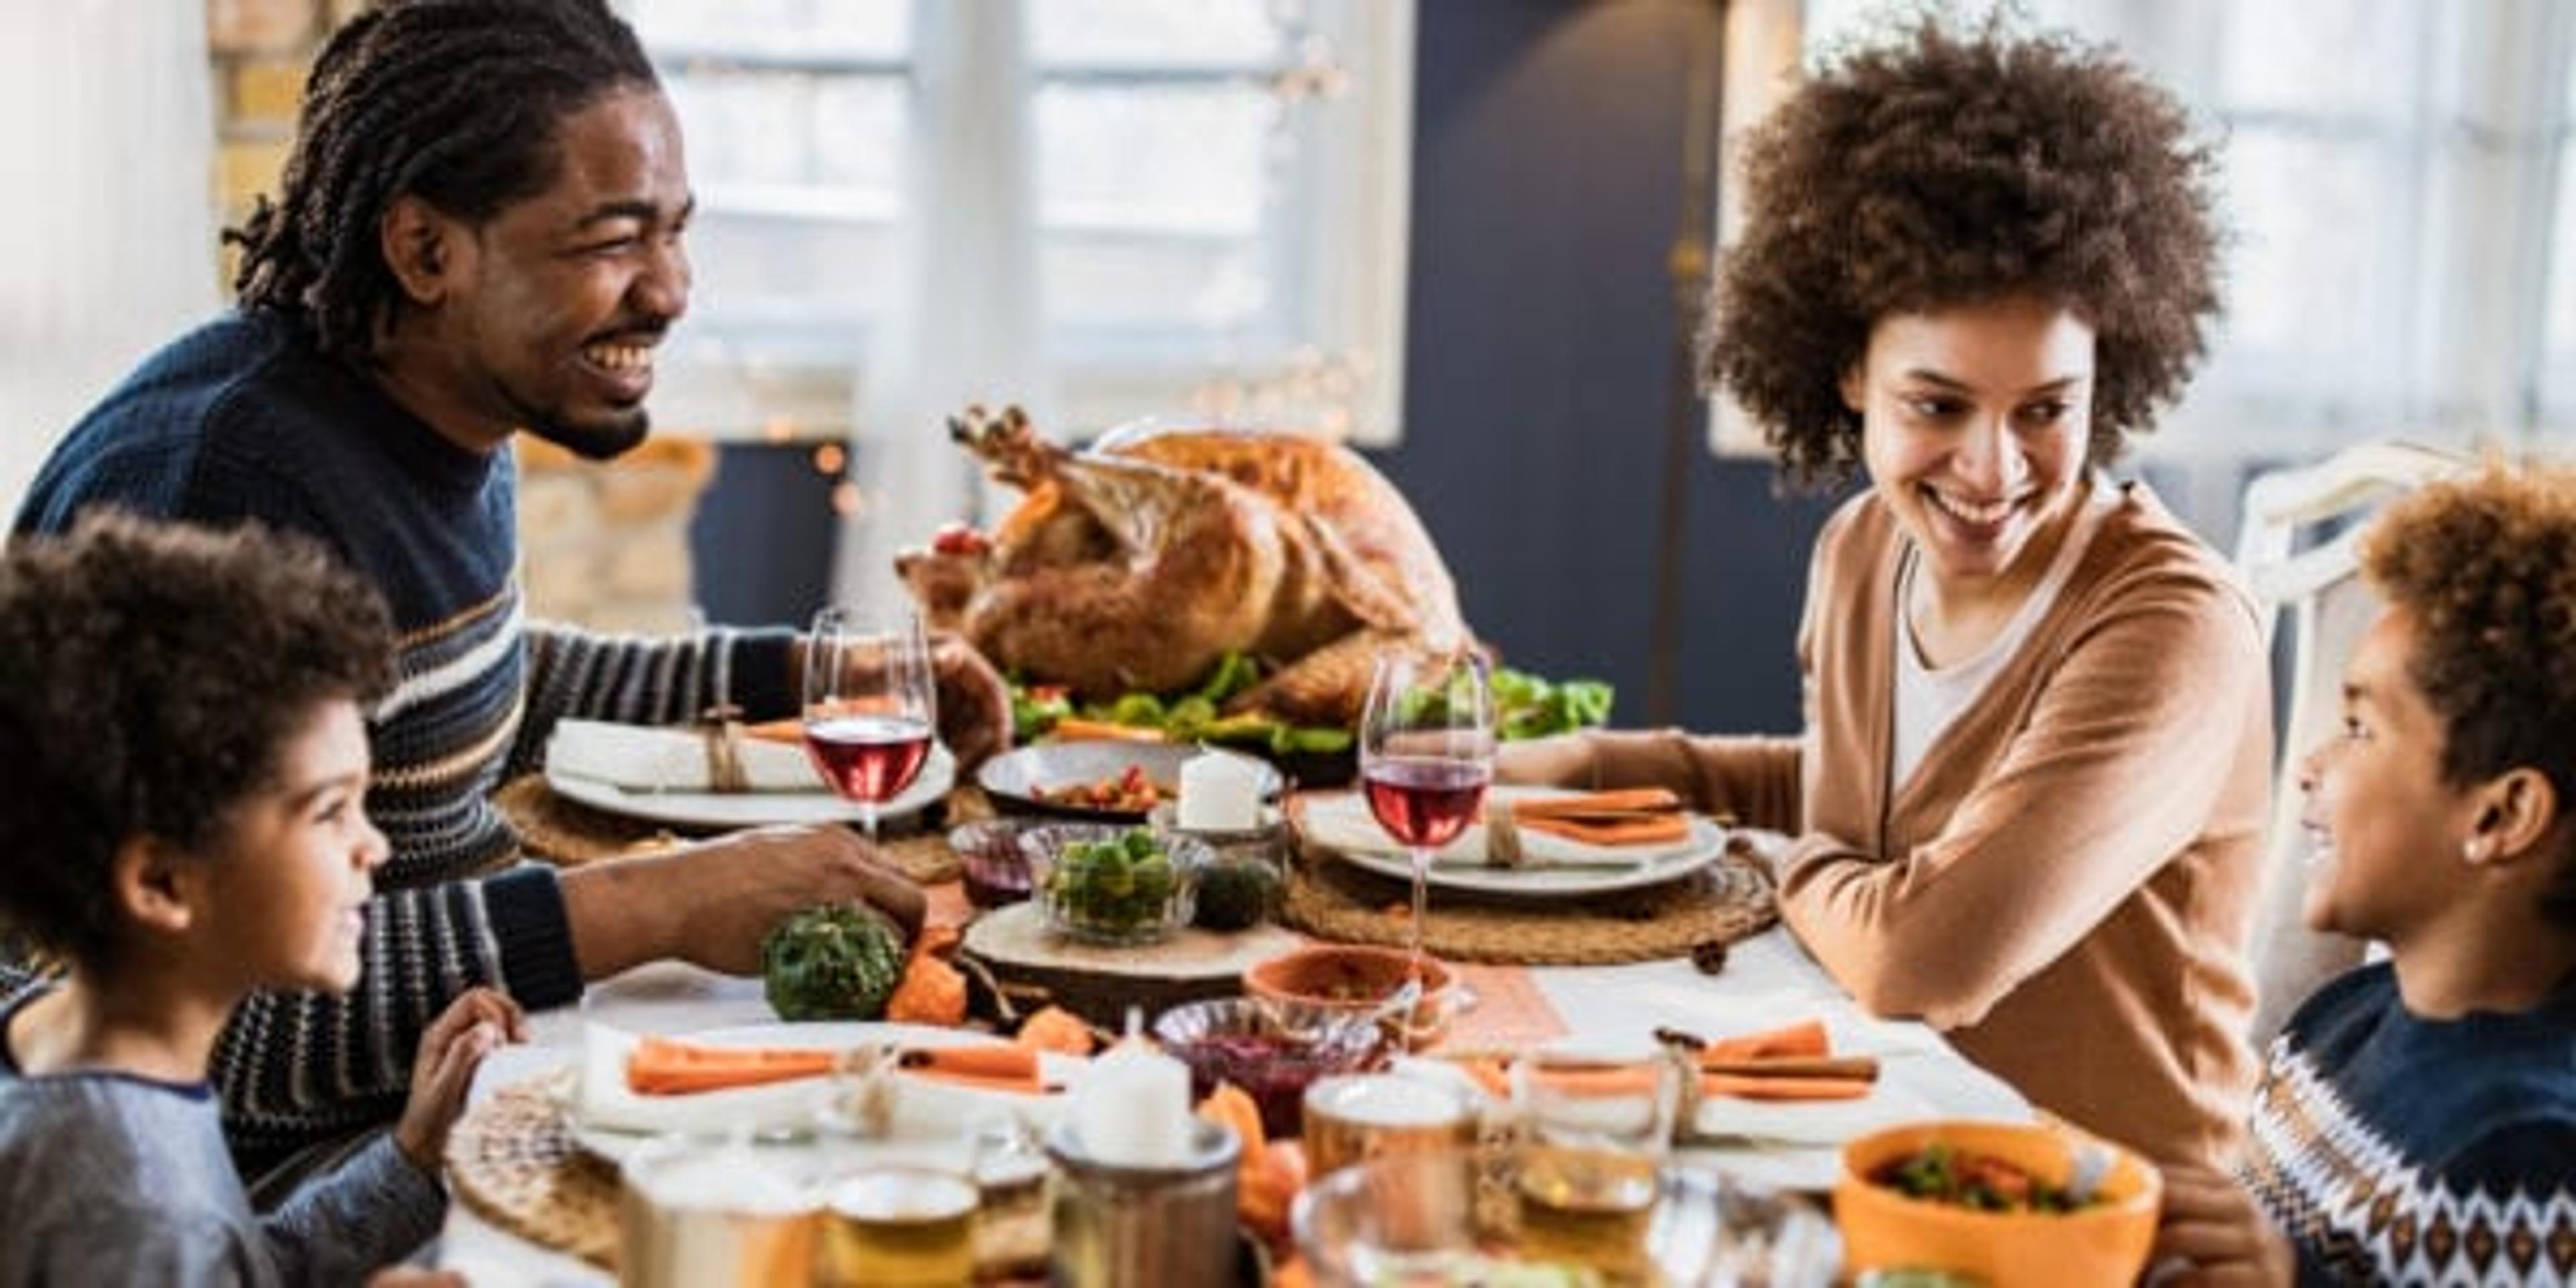 Happy black family talking during Thanksgiving meal at dining table.